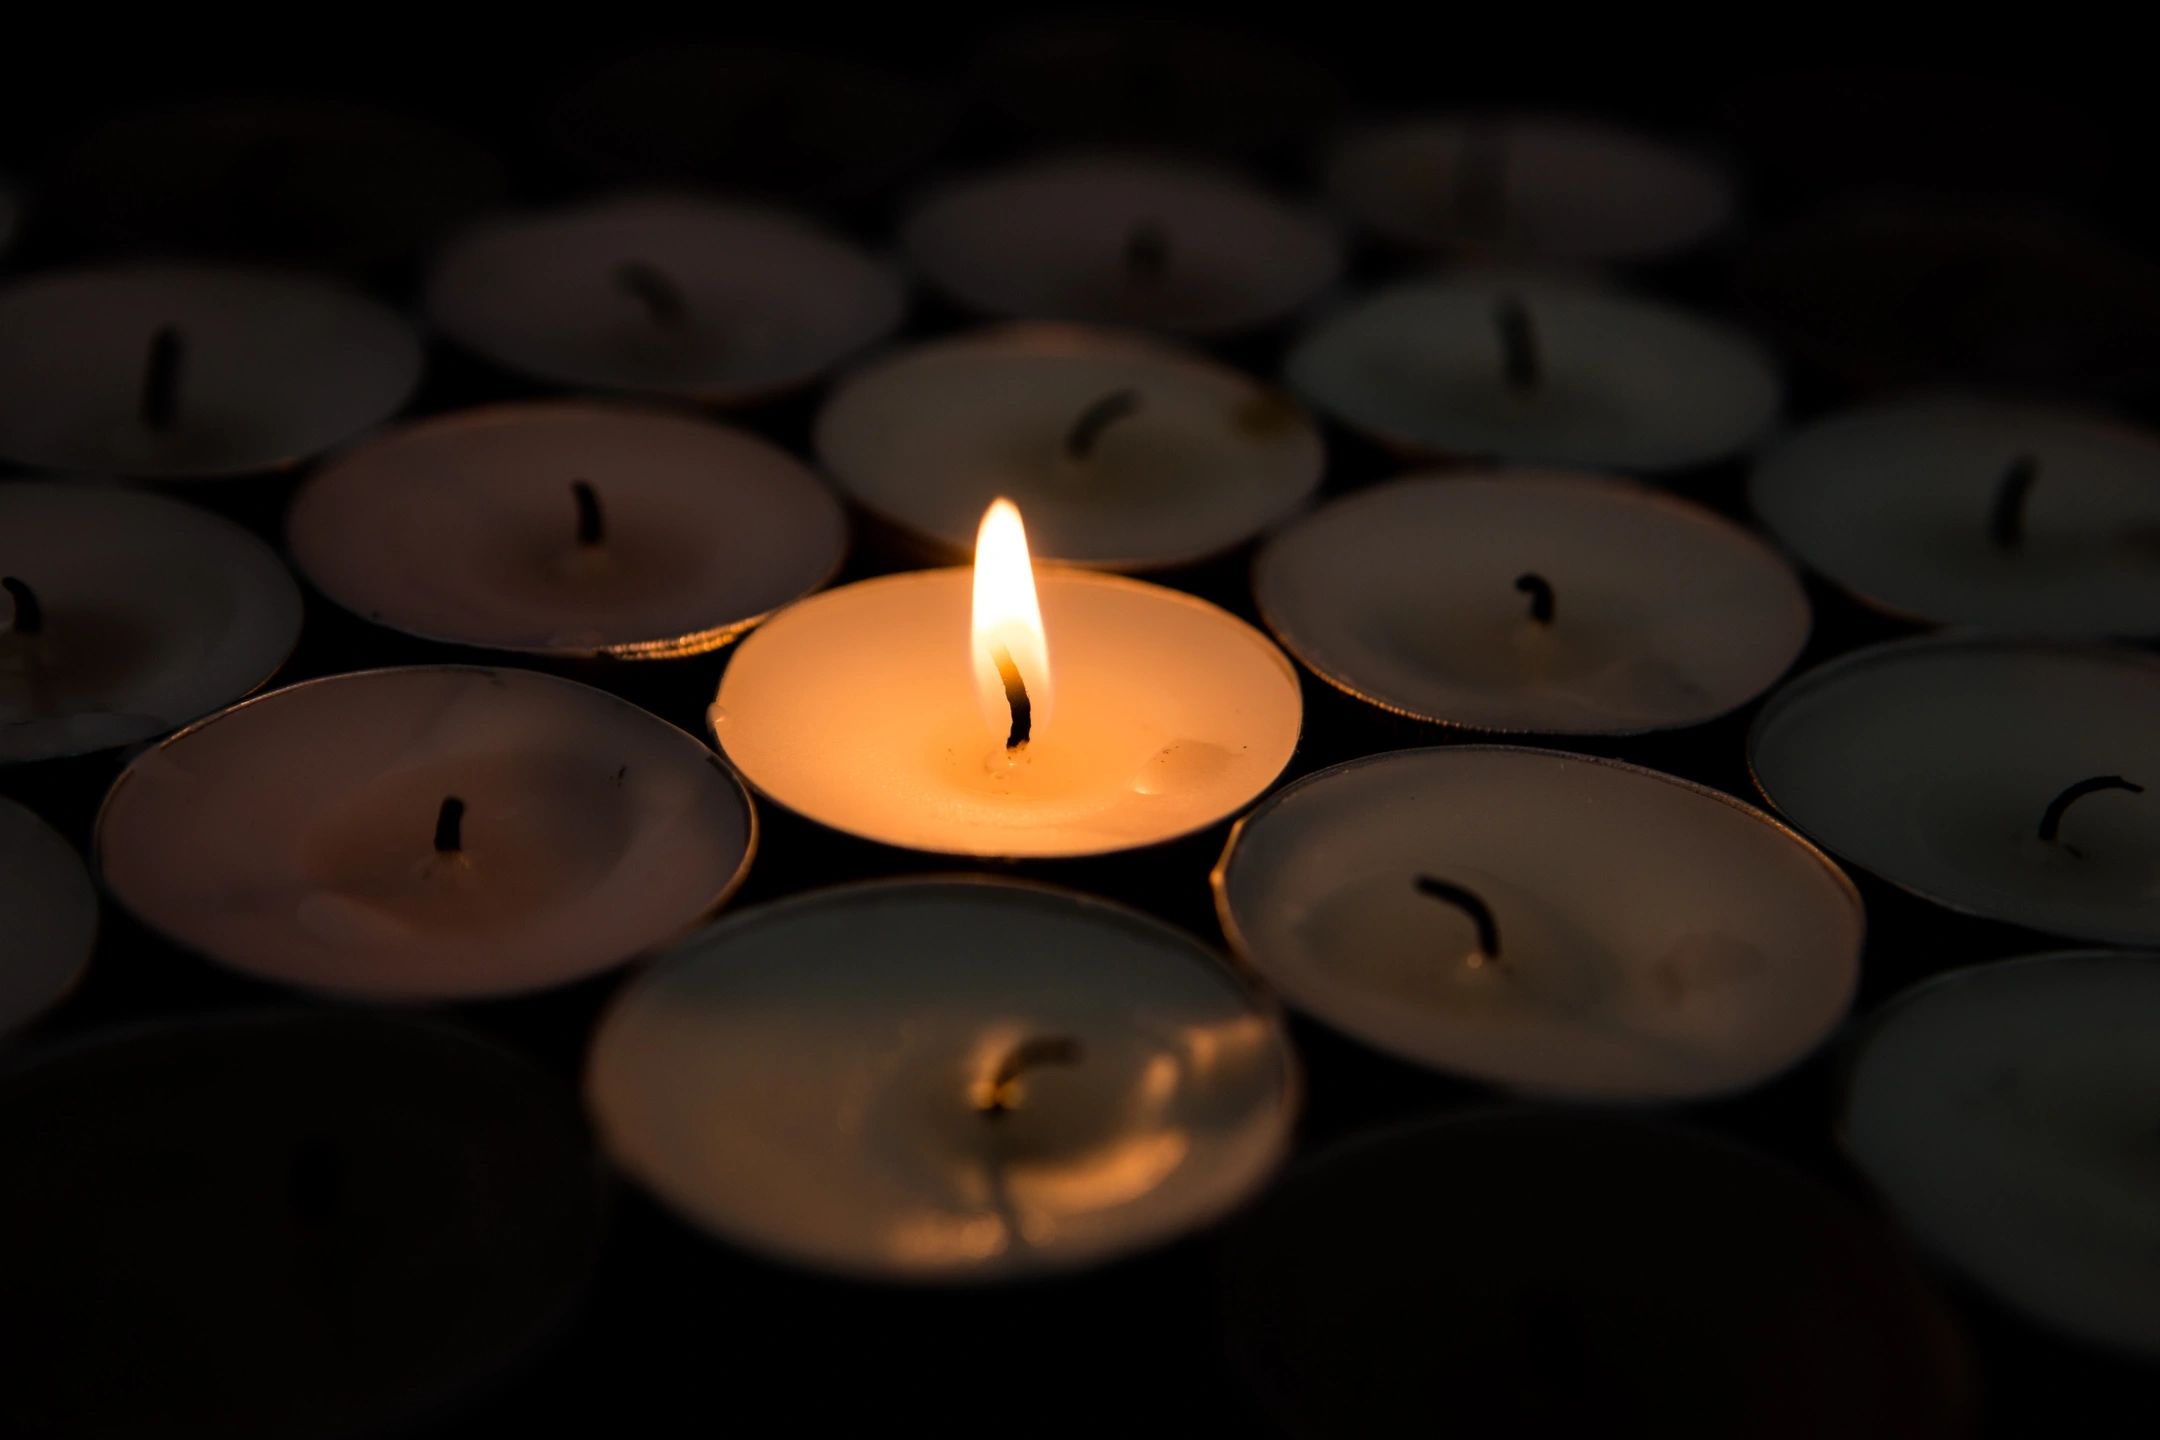 a single lit tealight candle issurrounded by unlit tealight candles